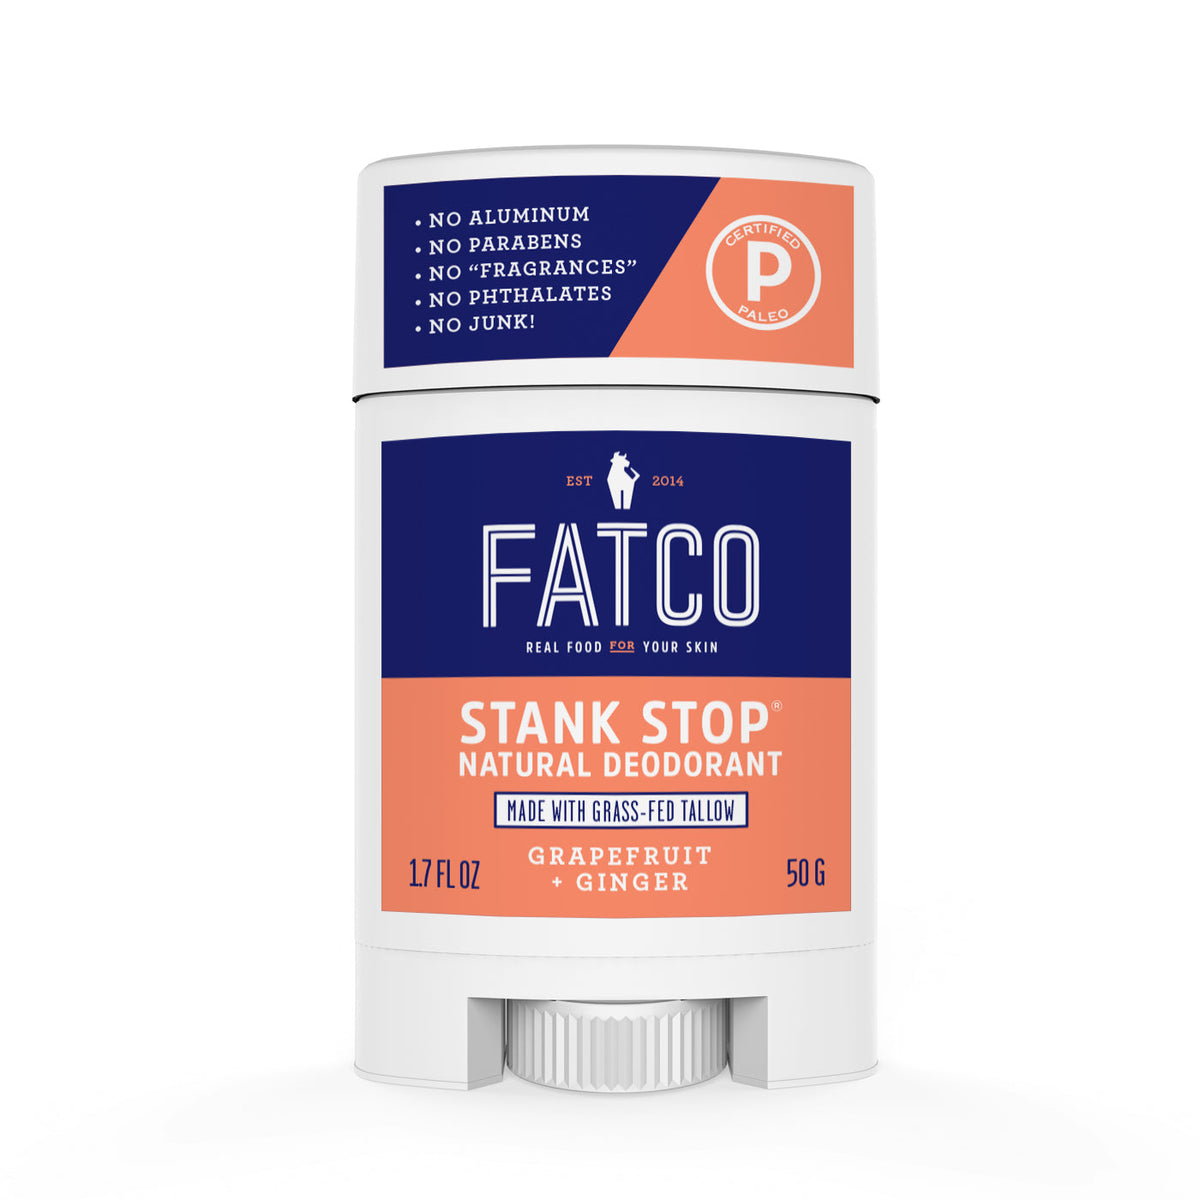 Stank Stop Deodorant Stick, Grapefruit+Ginger, 1.7 Oz by FATCO Skincare Products